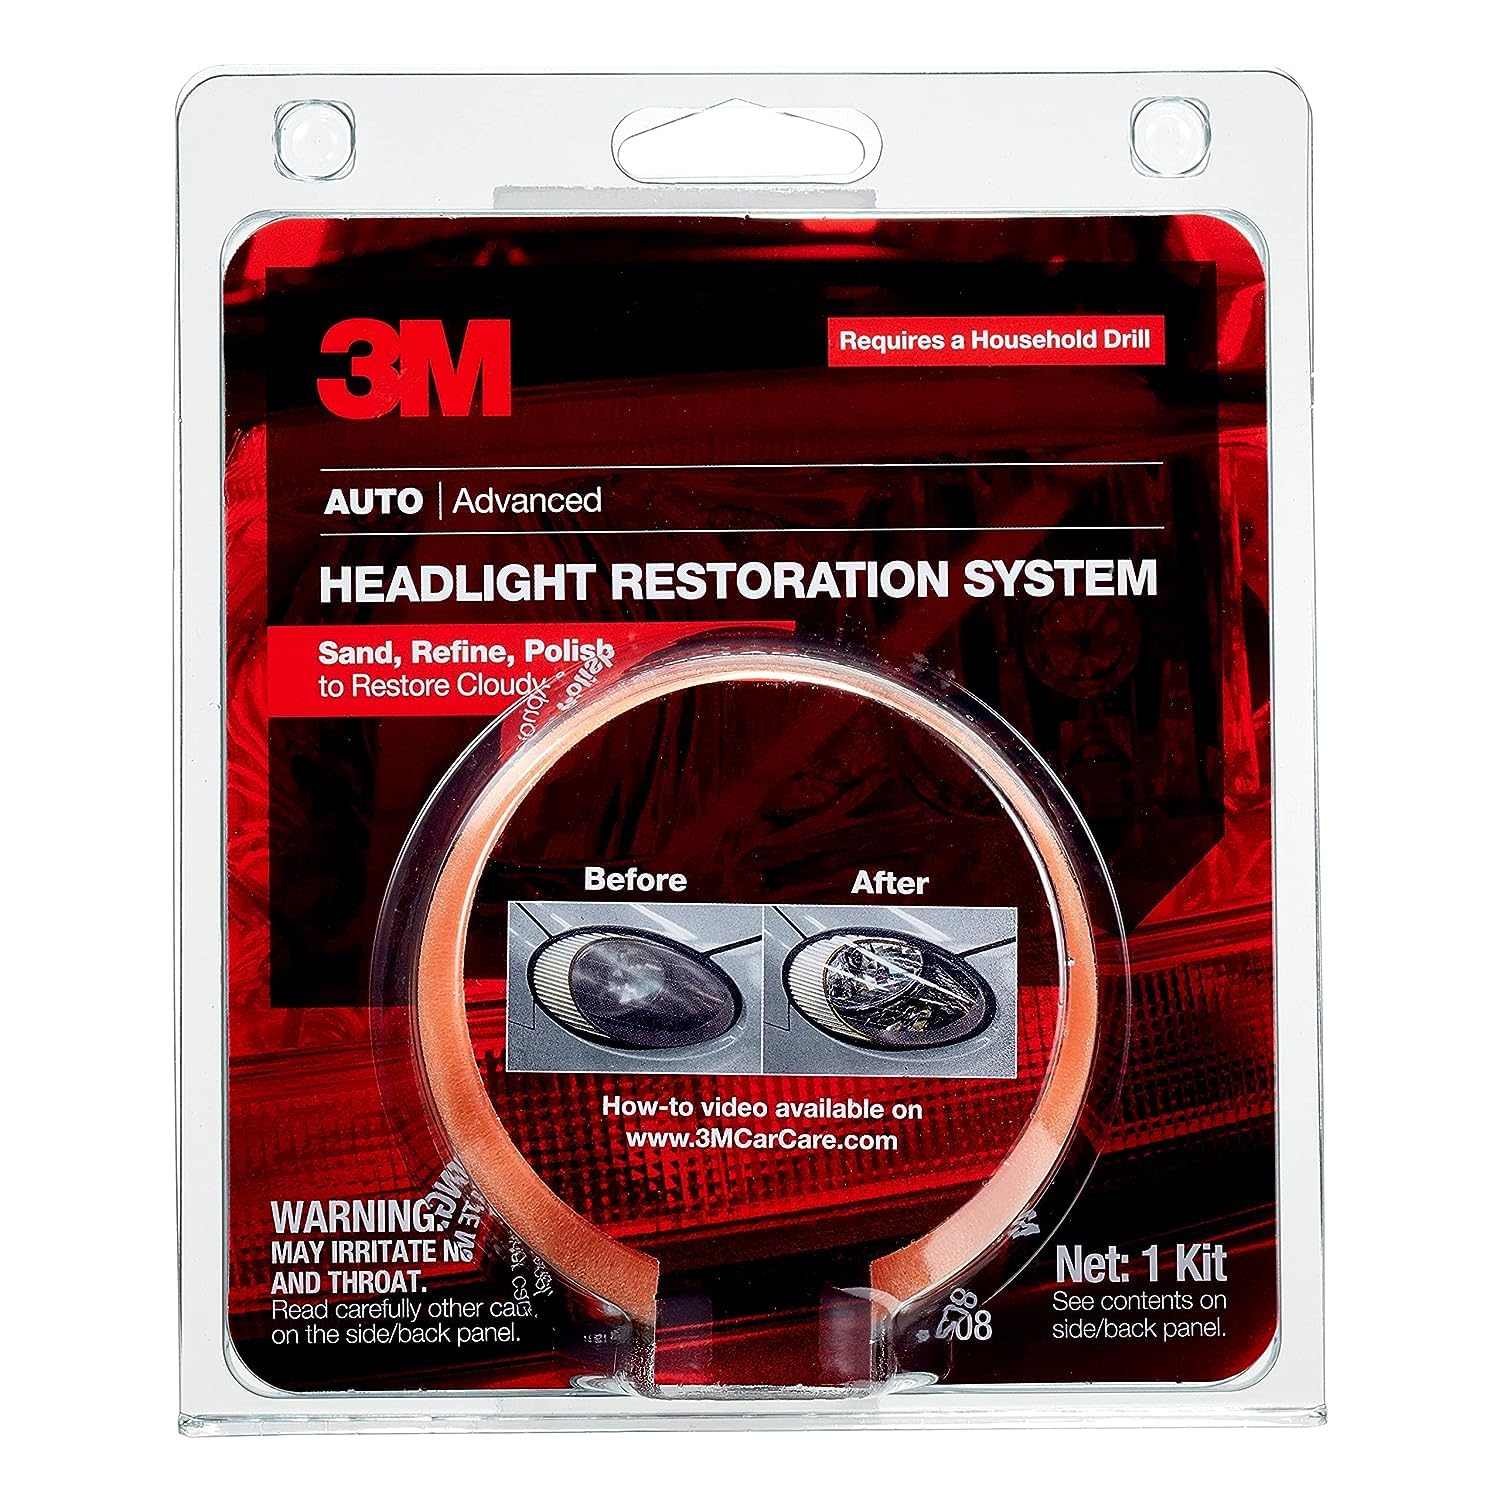 3M Headlight Lens Restoration System, Remove Harshest Yellowing, Includes 500 & 800 Grit Sanding & Refining Discs, 3M Rubbing Compound and Drill Pad Holder, Restore Clearness (39008)